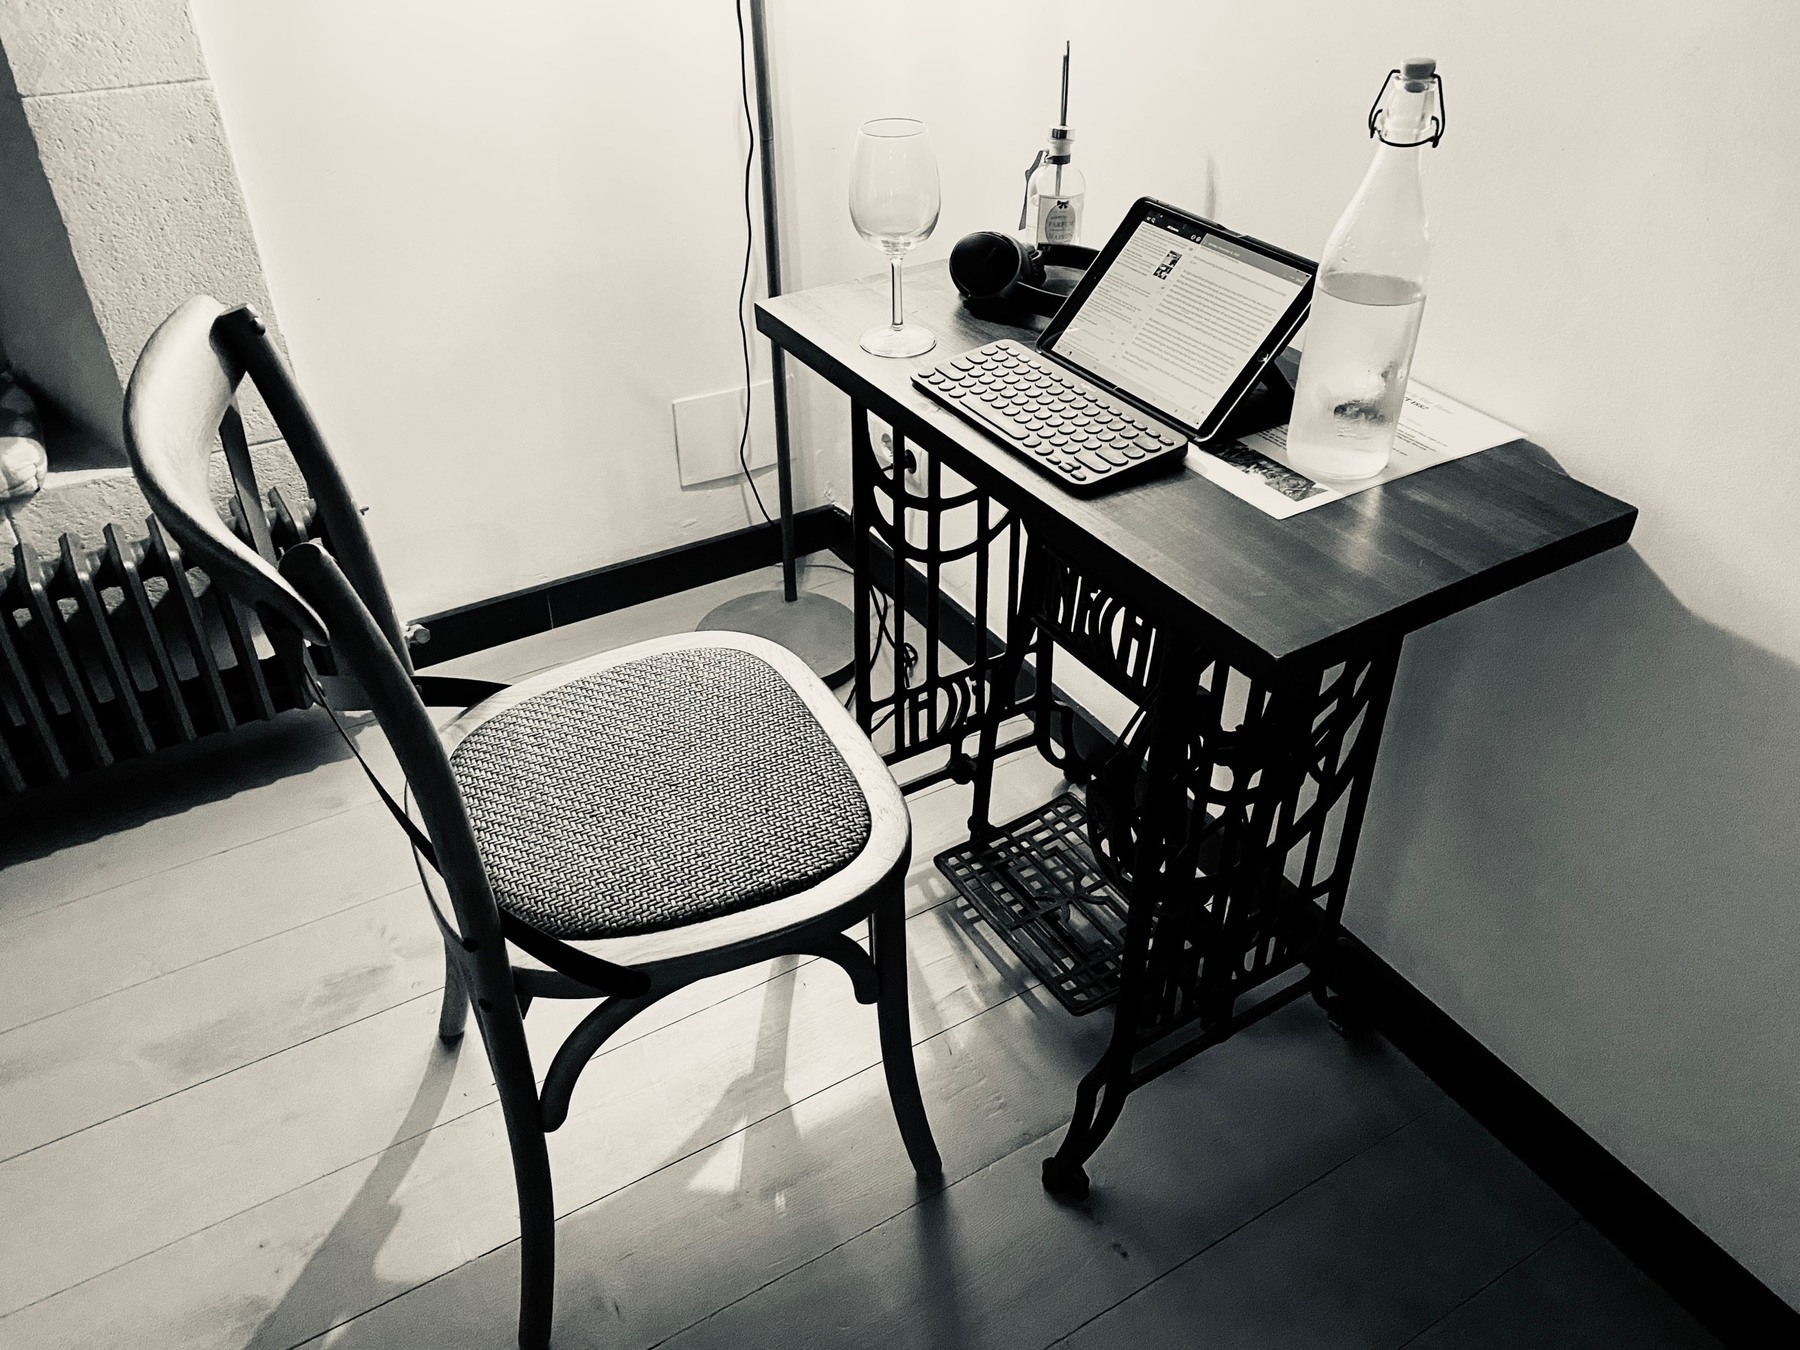 Black-and-white photo of a wooden writing desk made of an old sewing machine, topped by an iPad, keyboard, water bottle, and wine glass.